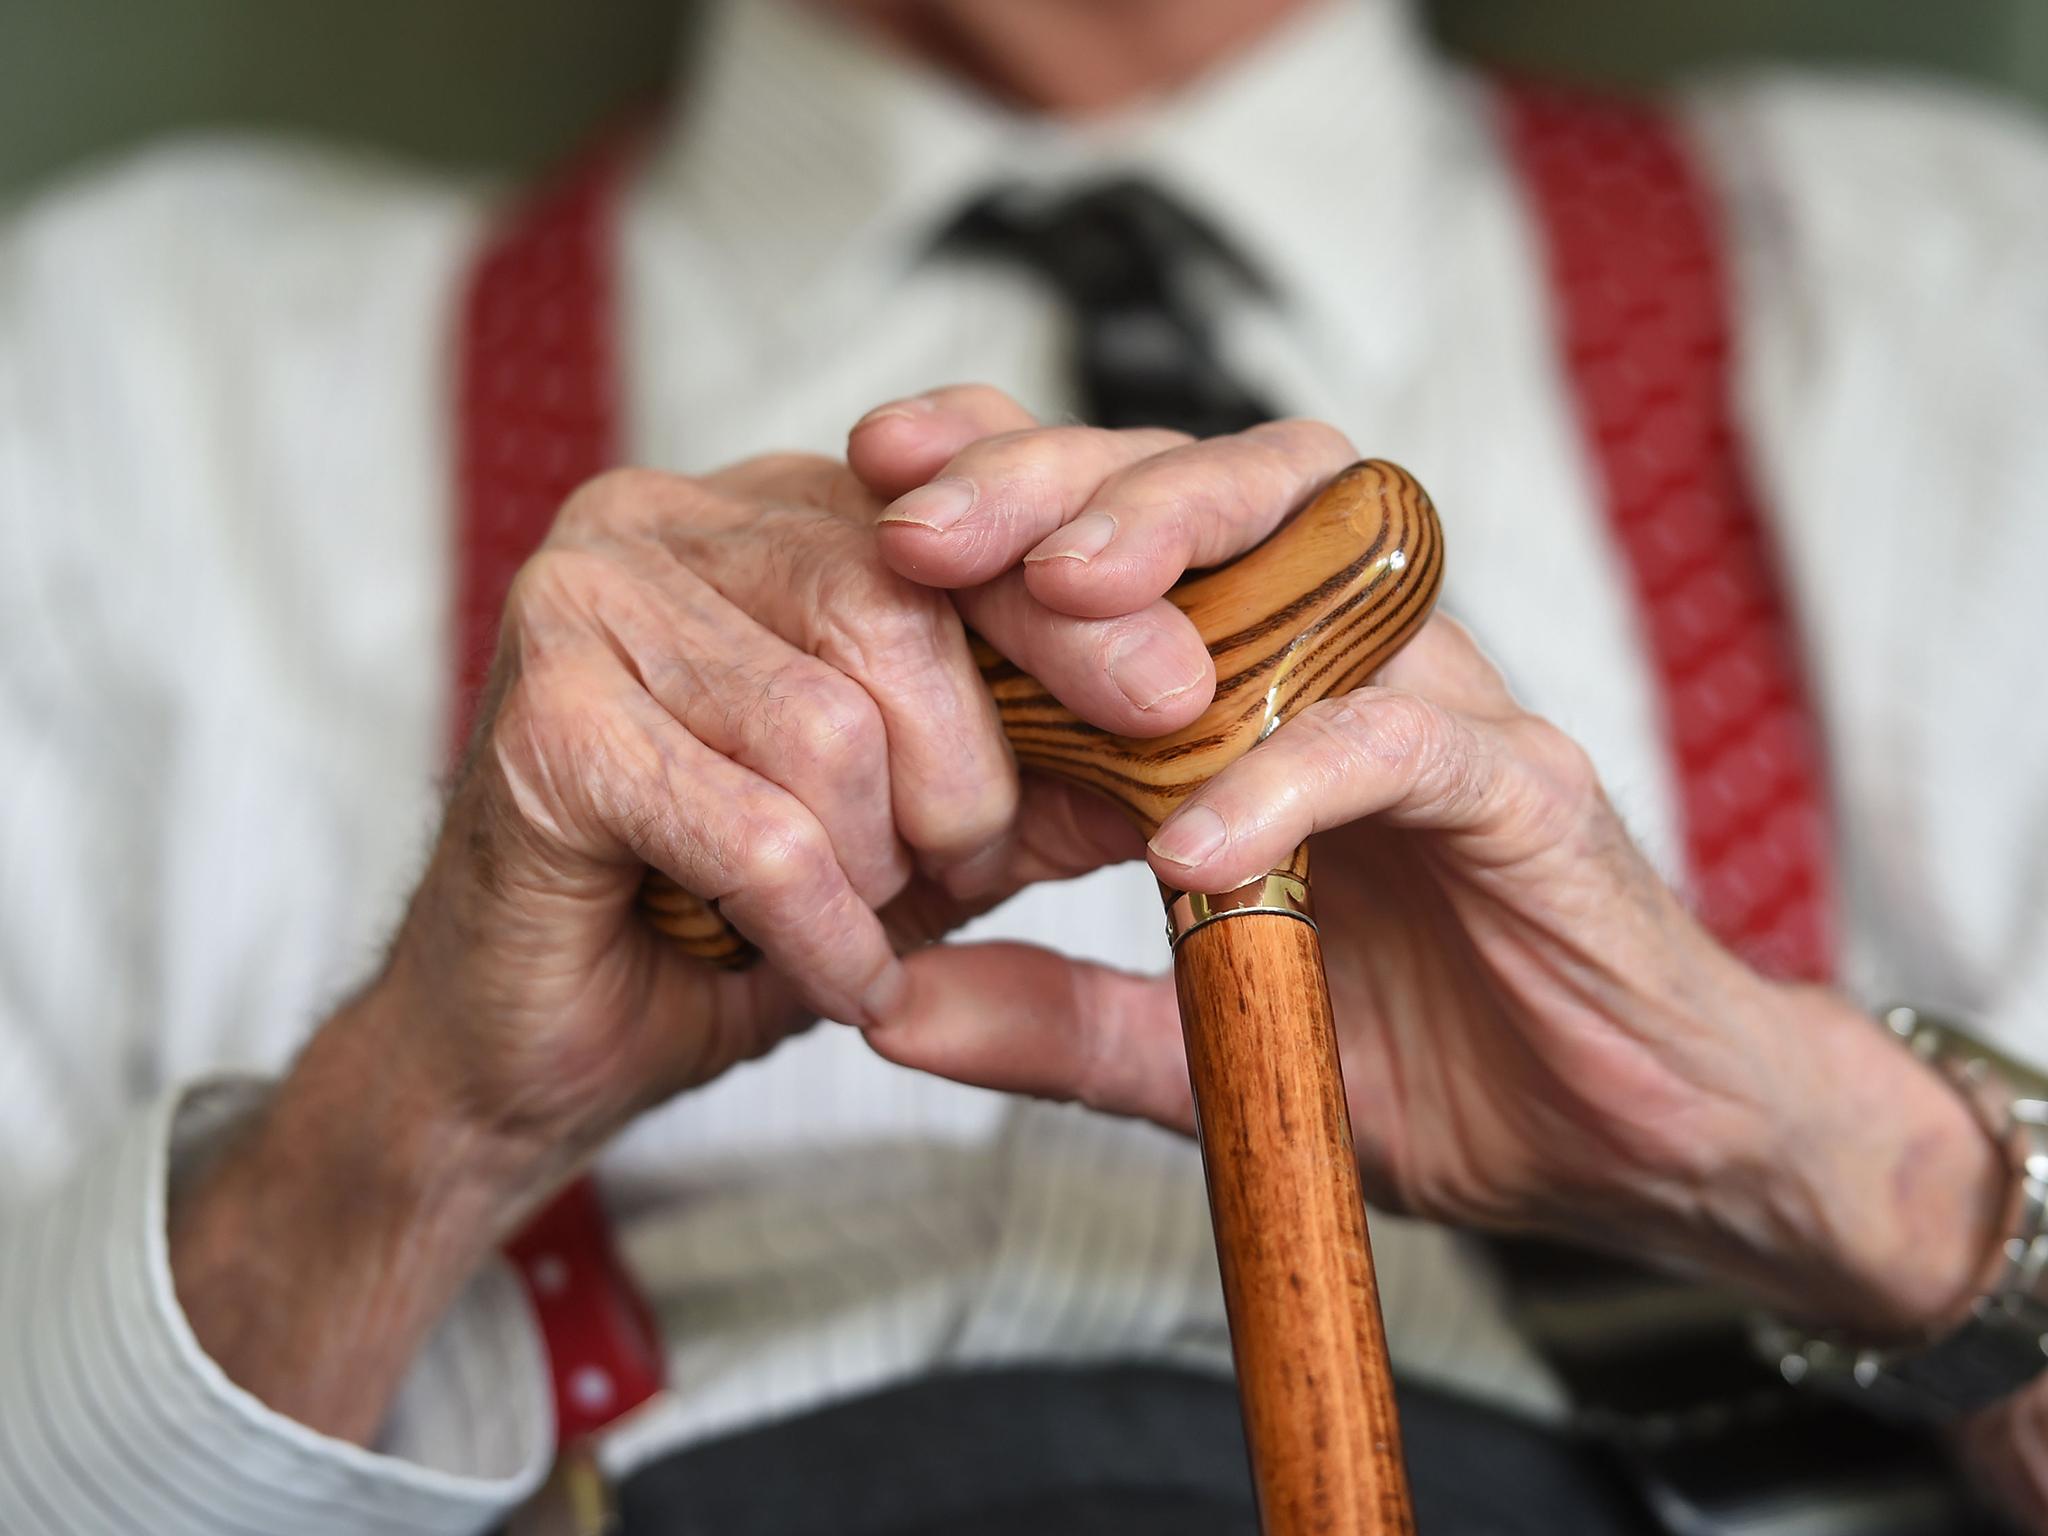 Rising elderly population increasing demands for social care as budgets cut